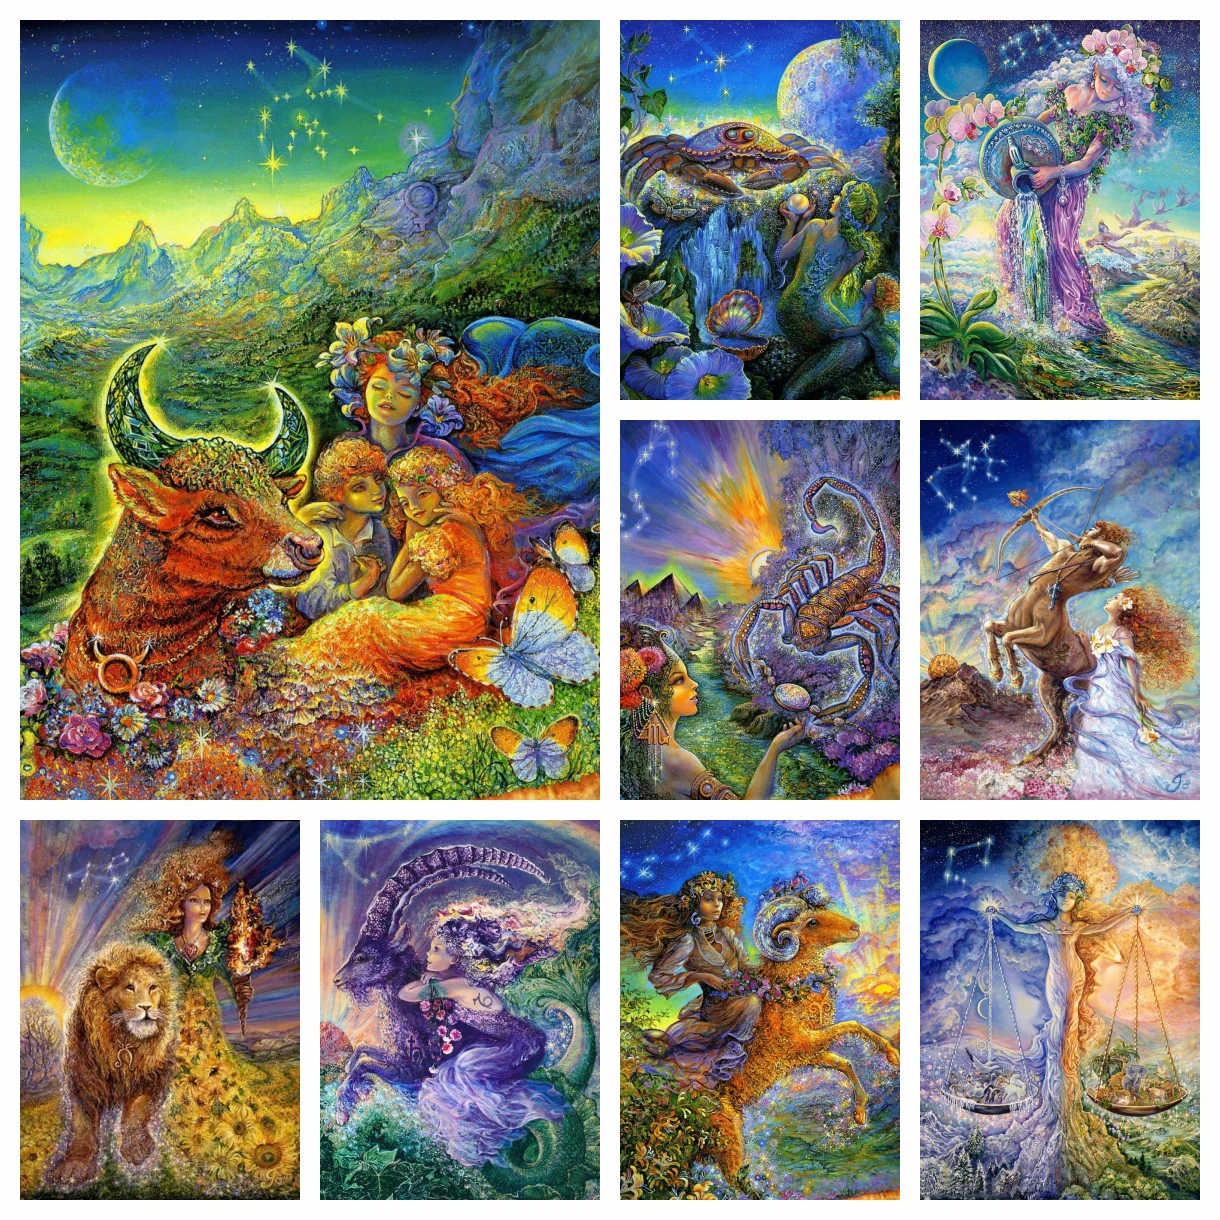 

5D 12 Constellations Zodiac Painting Diamond Embroidery Kit Fantasy Cartoon Girl Wall Art Cross Stitch Mosaic Picture Home Decor